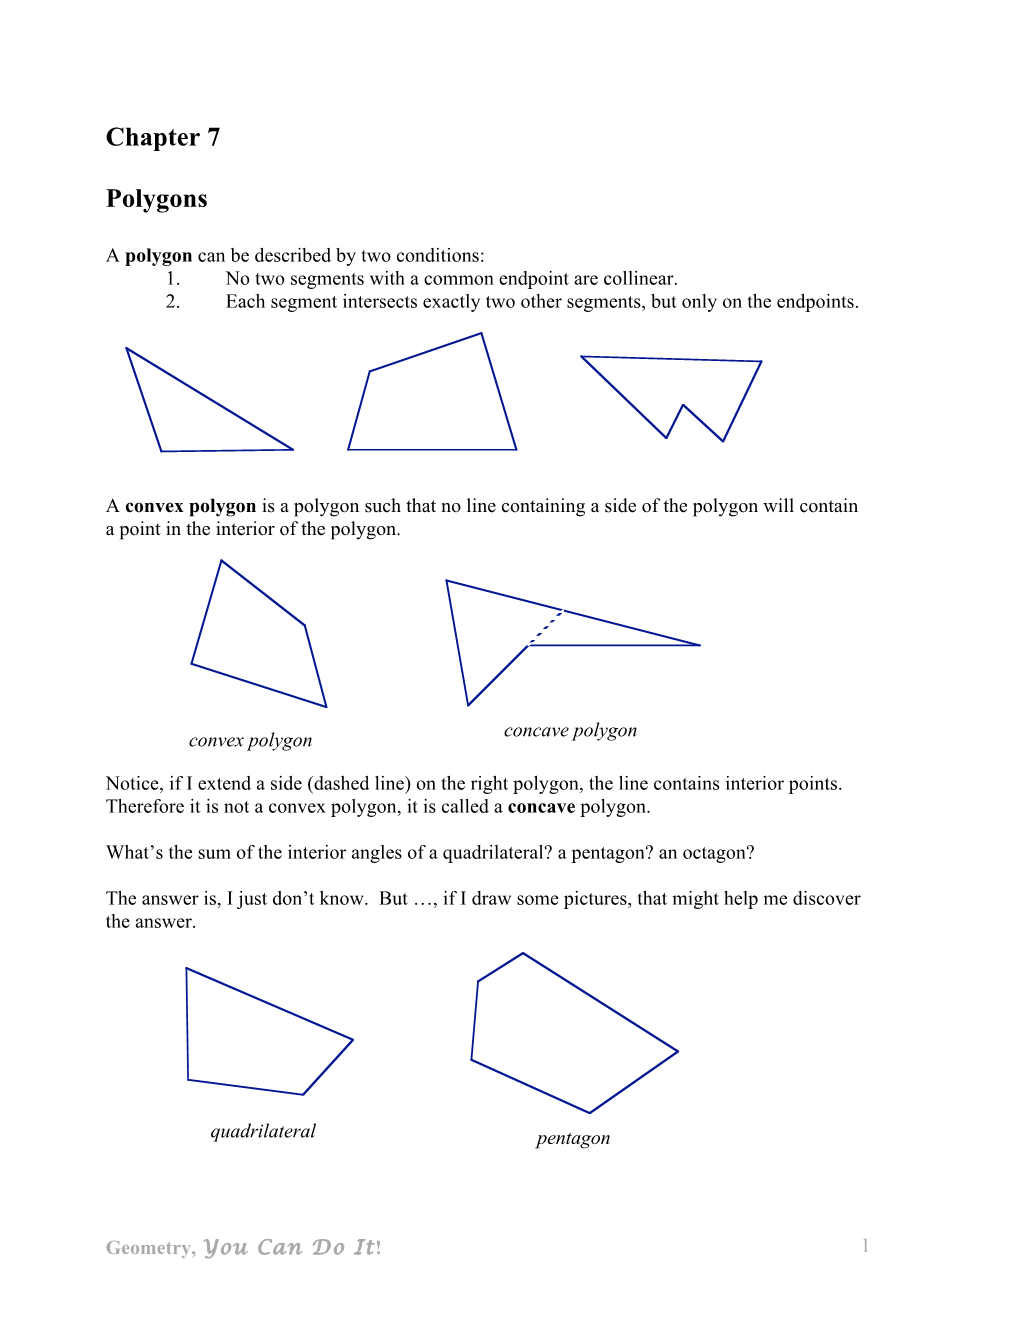 Exterior Angles – Polygons